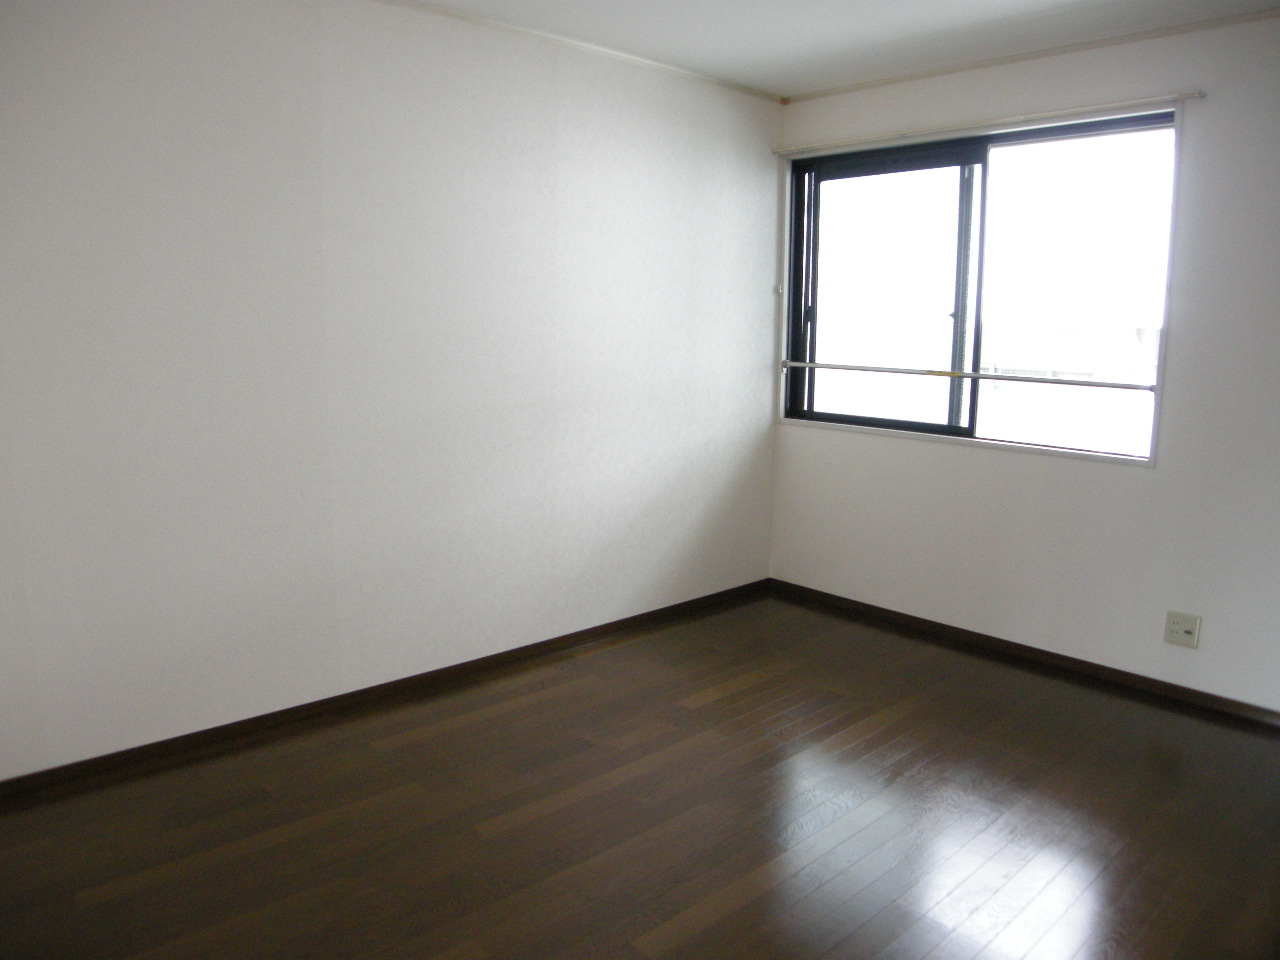 Living and room. Western-style room is, Flooring